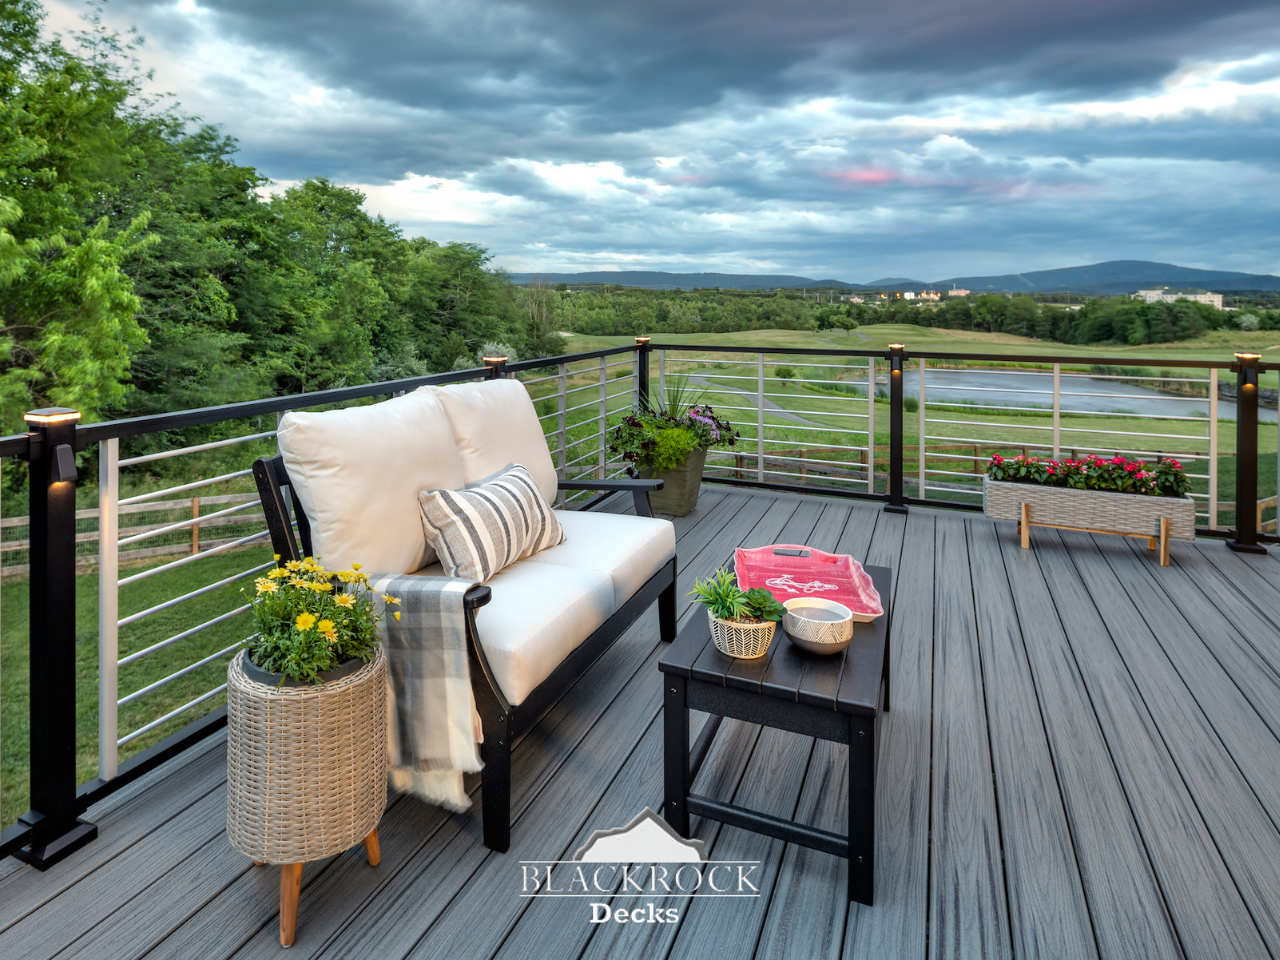 Transforming your backyard into a beautiful outdoor oasis has never been easier with our custom deck, patio, and pergola building services in Cedar Hills, Utah. Whether you're looking to entertain guests or simply want a relaxing space to unwind, our team of experts is here to bring your vision to life. From the initial design to the finishing touches, we provide a seamless and stress-free experience for your outdoor project. Contact us today to receive a quote and take the first step towards creating the backyard of your dreams. We can't wait to work with you!